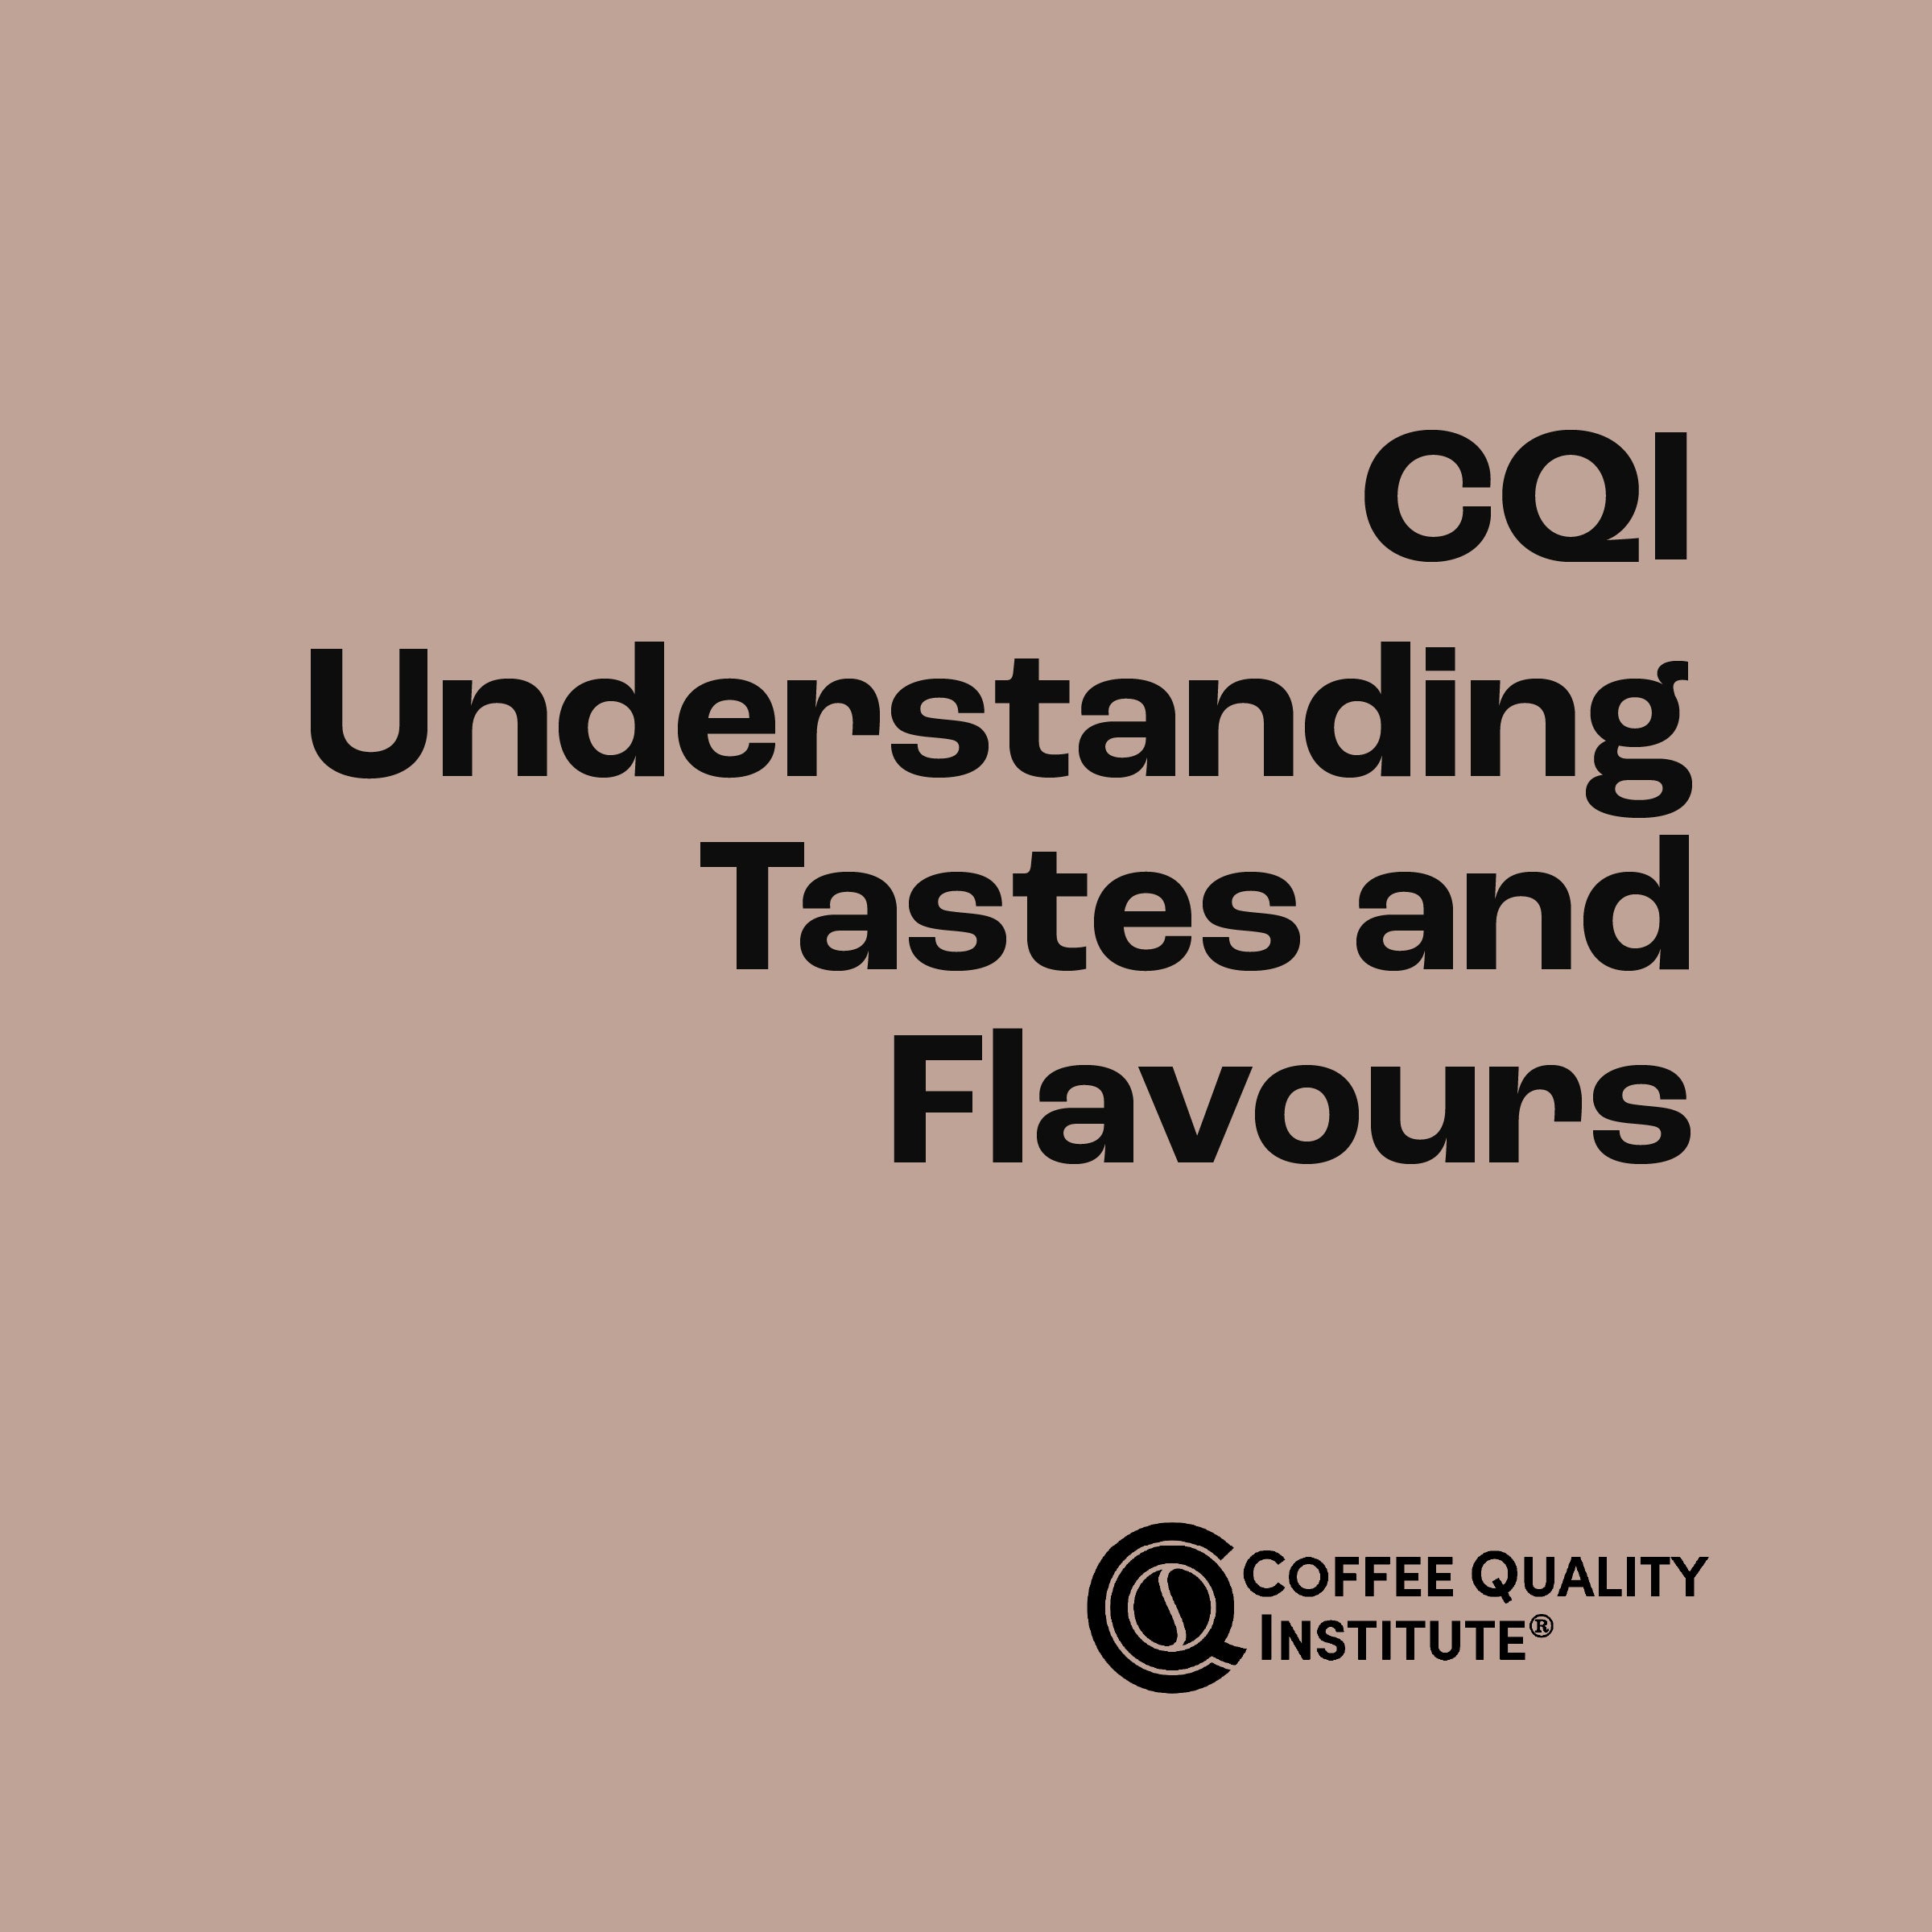 CQI: Understanding Tastes and Flavours